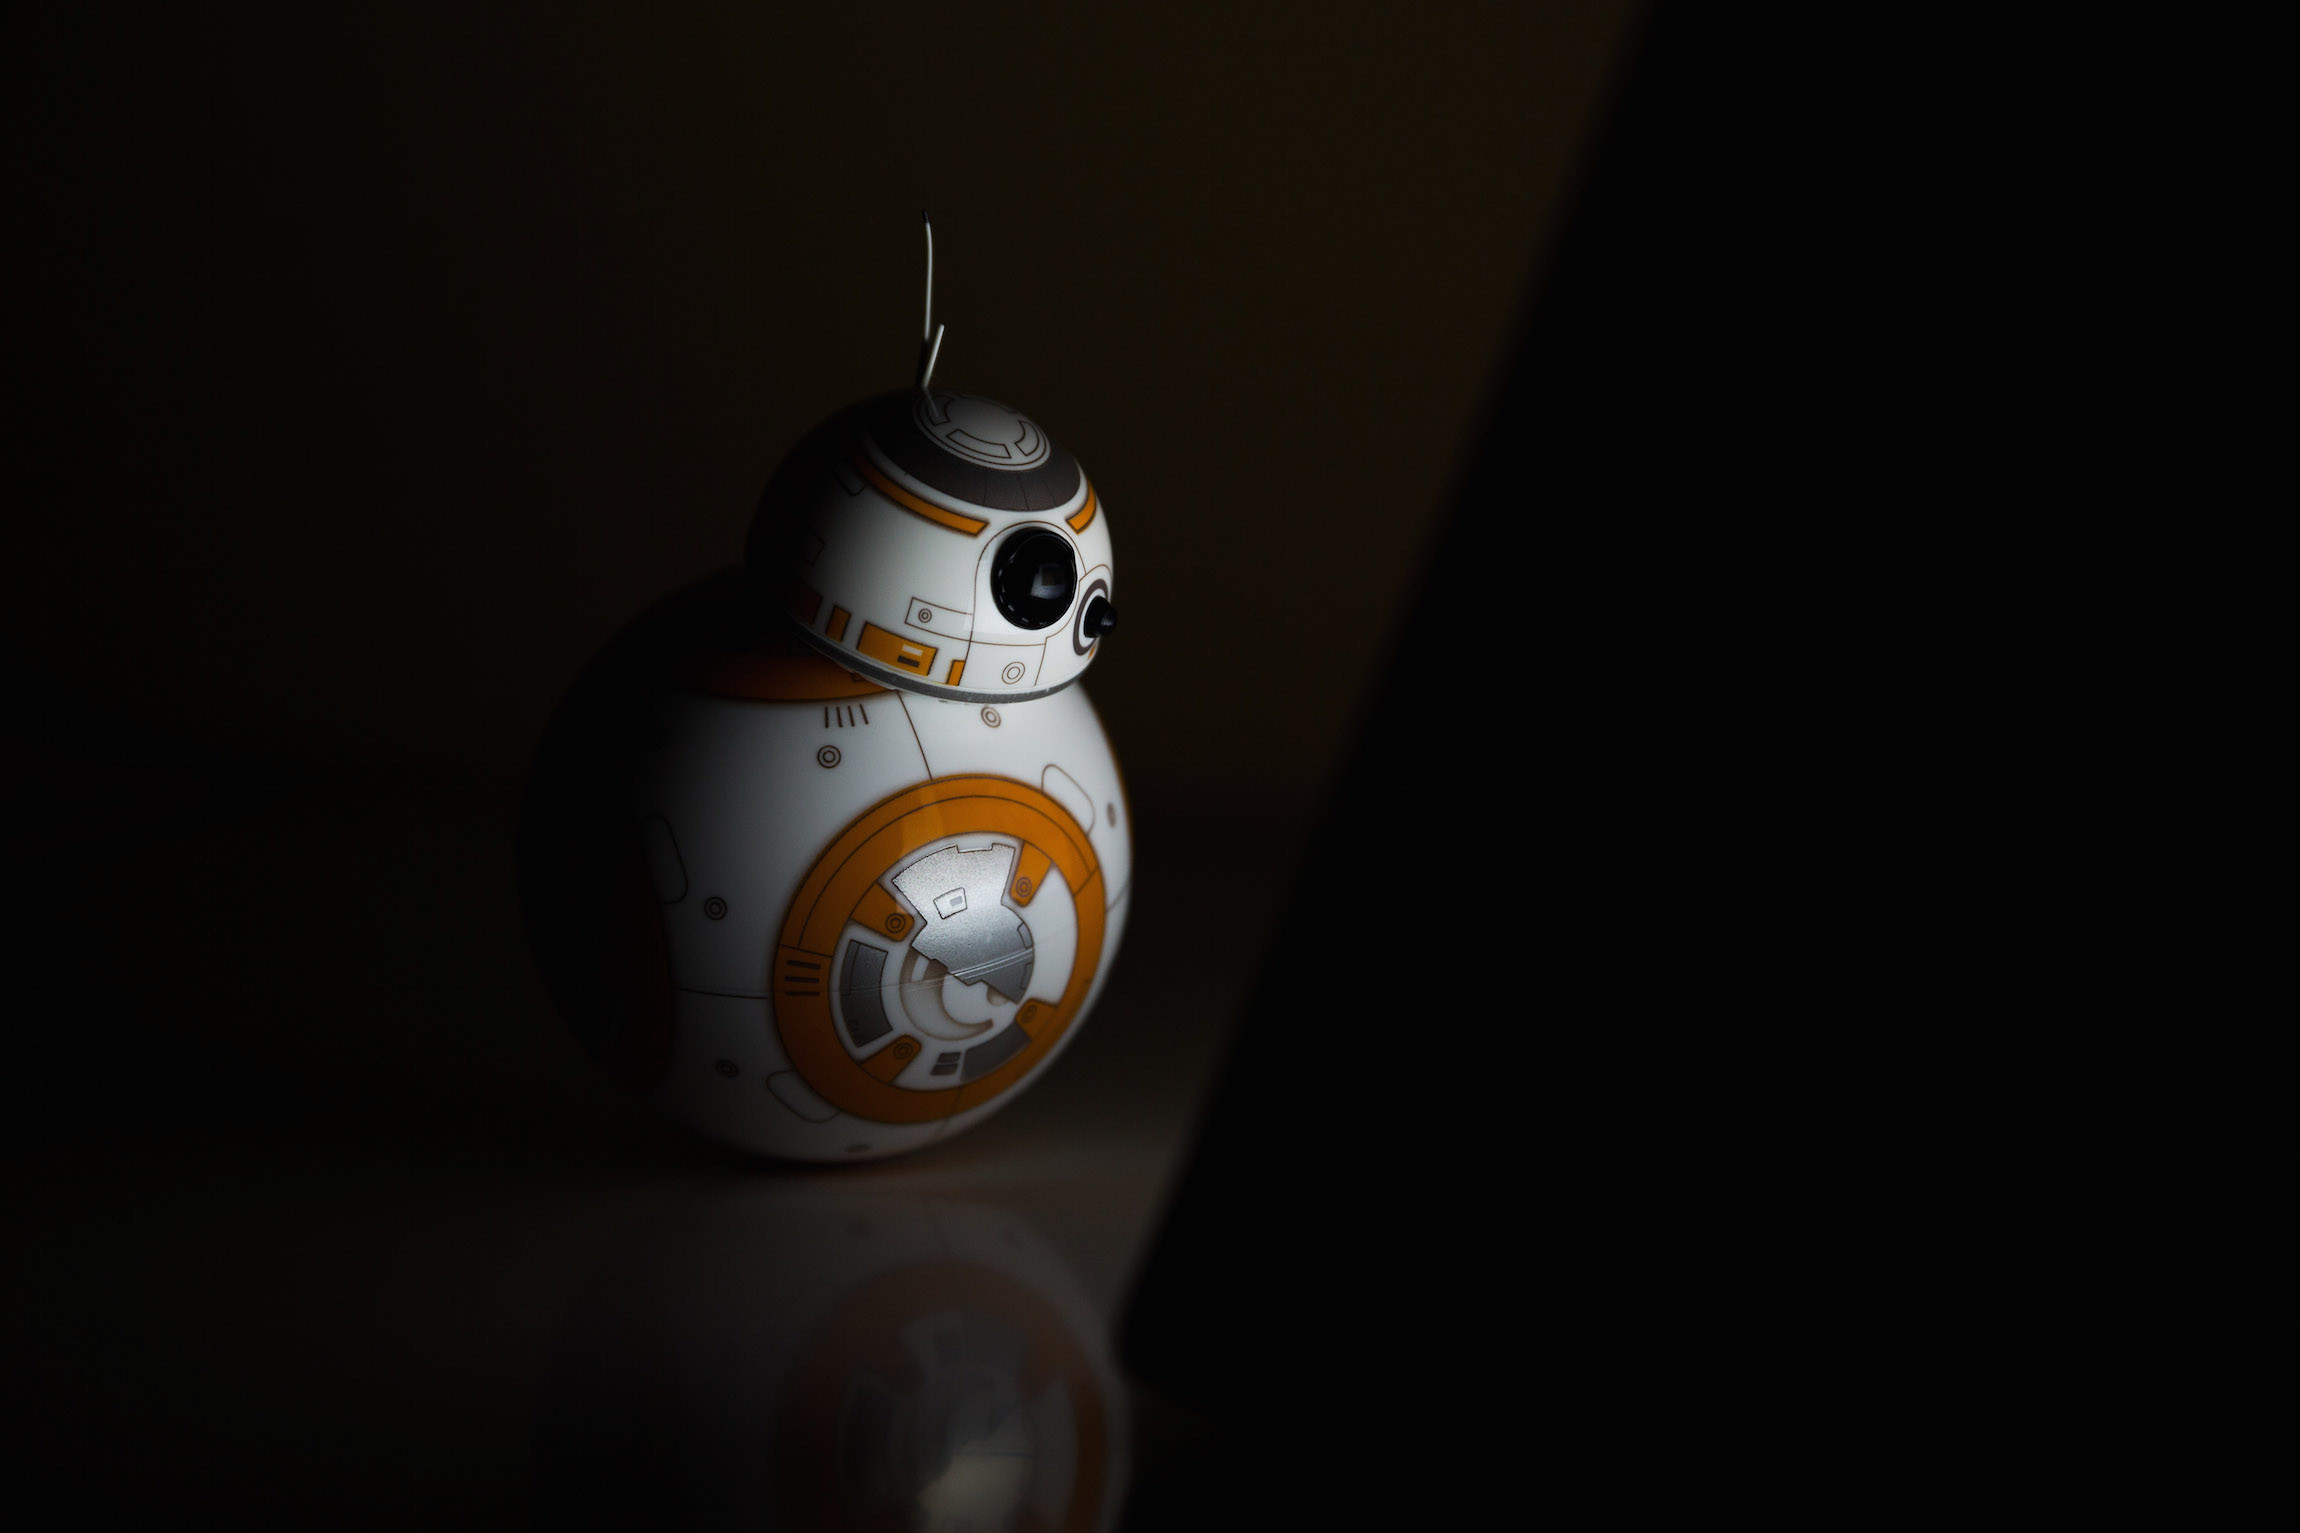 2300x1533 A Day in the Life of Sphero's BB-8 | StarWars.com